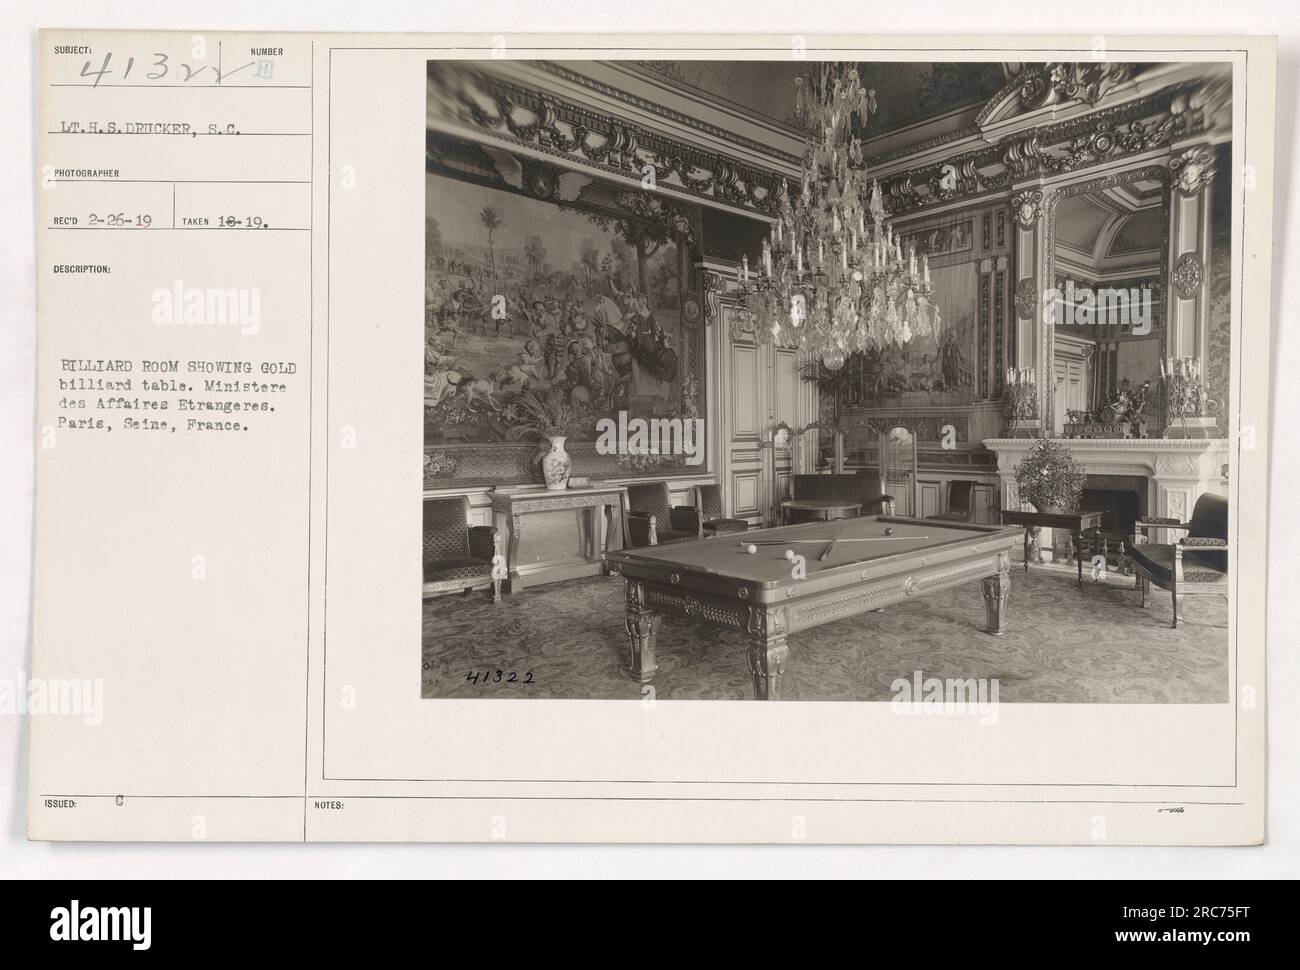 Lt. H.S. Dricker, S.C. is photographed in the Sumber Billiard Room, located in the Ministere des Affaires Etrangeres in Paris, France. The image shows a gold billiard table. This photograph was taken on February 26, 1919. Stock Photo